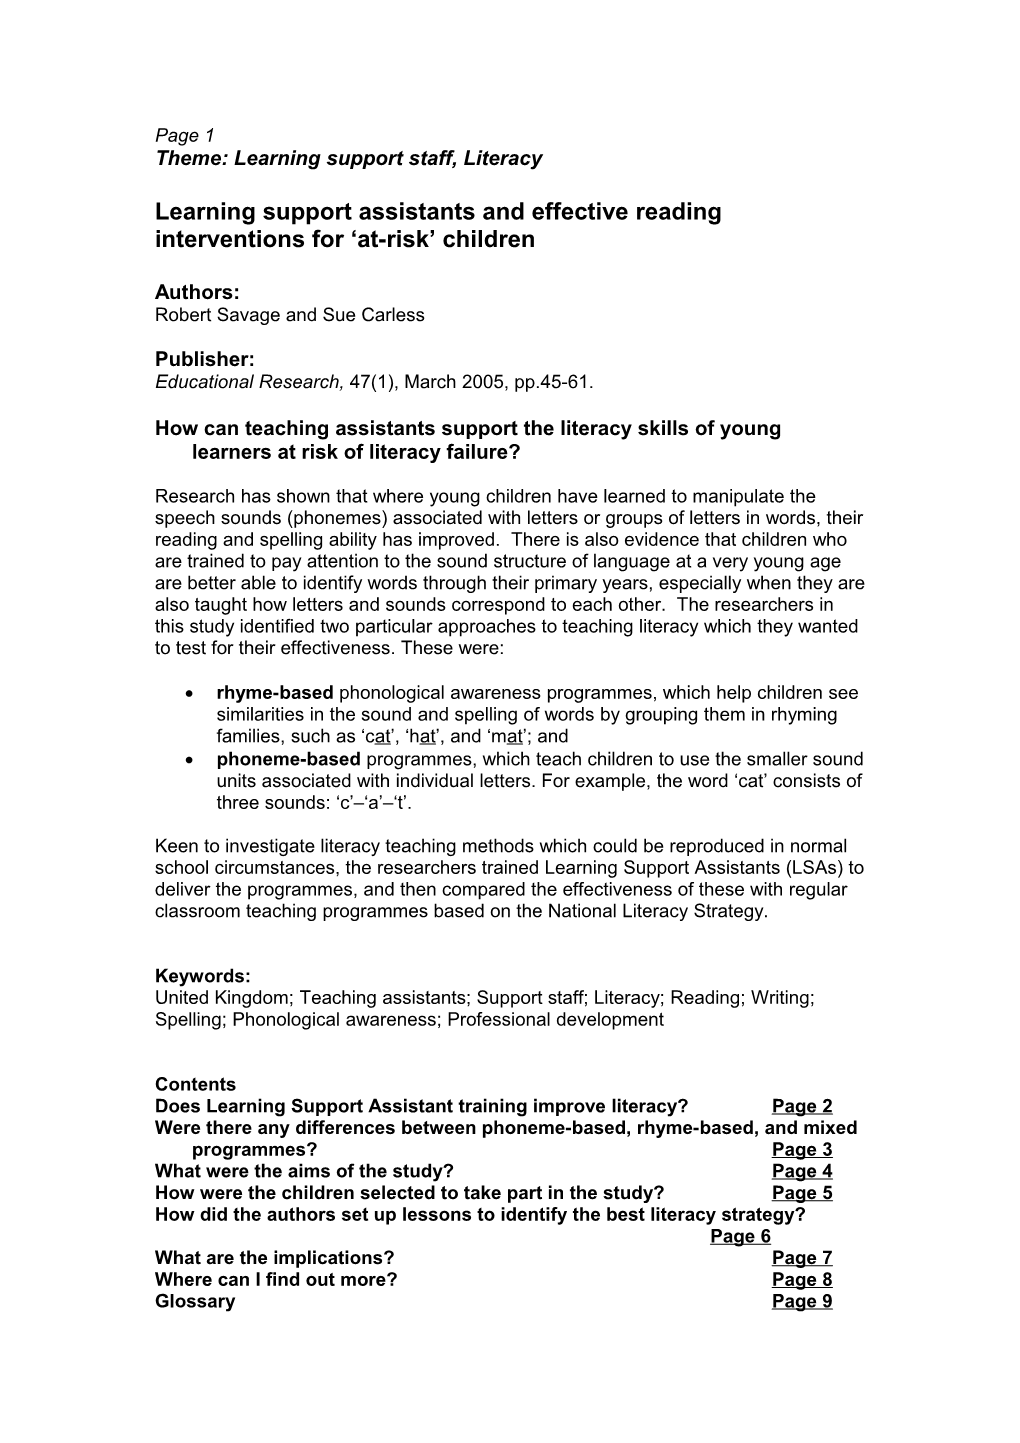 Internalising and Externalising Problems in Middle Childhood: a Study of Indian and English